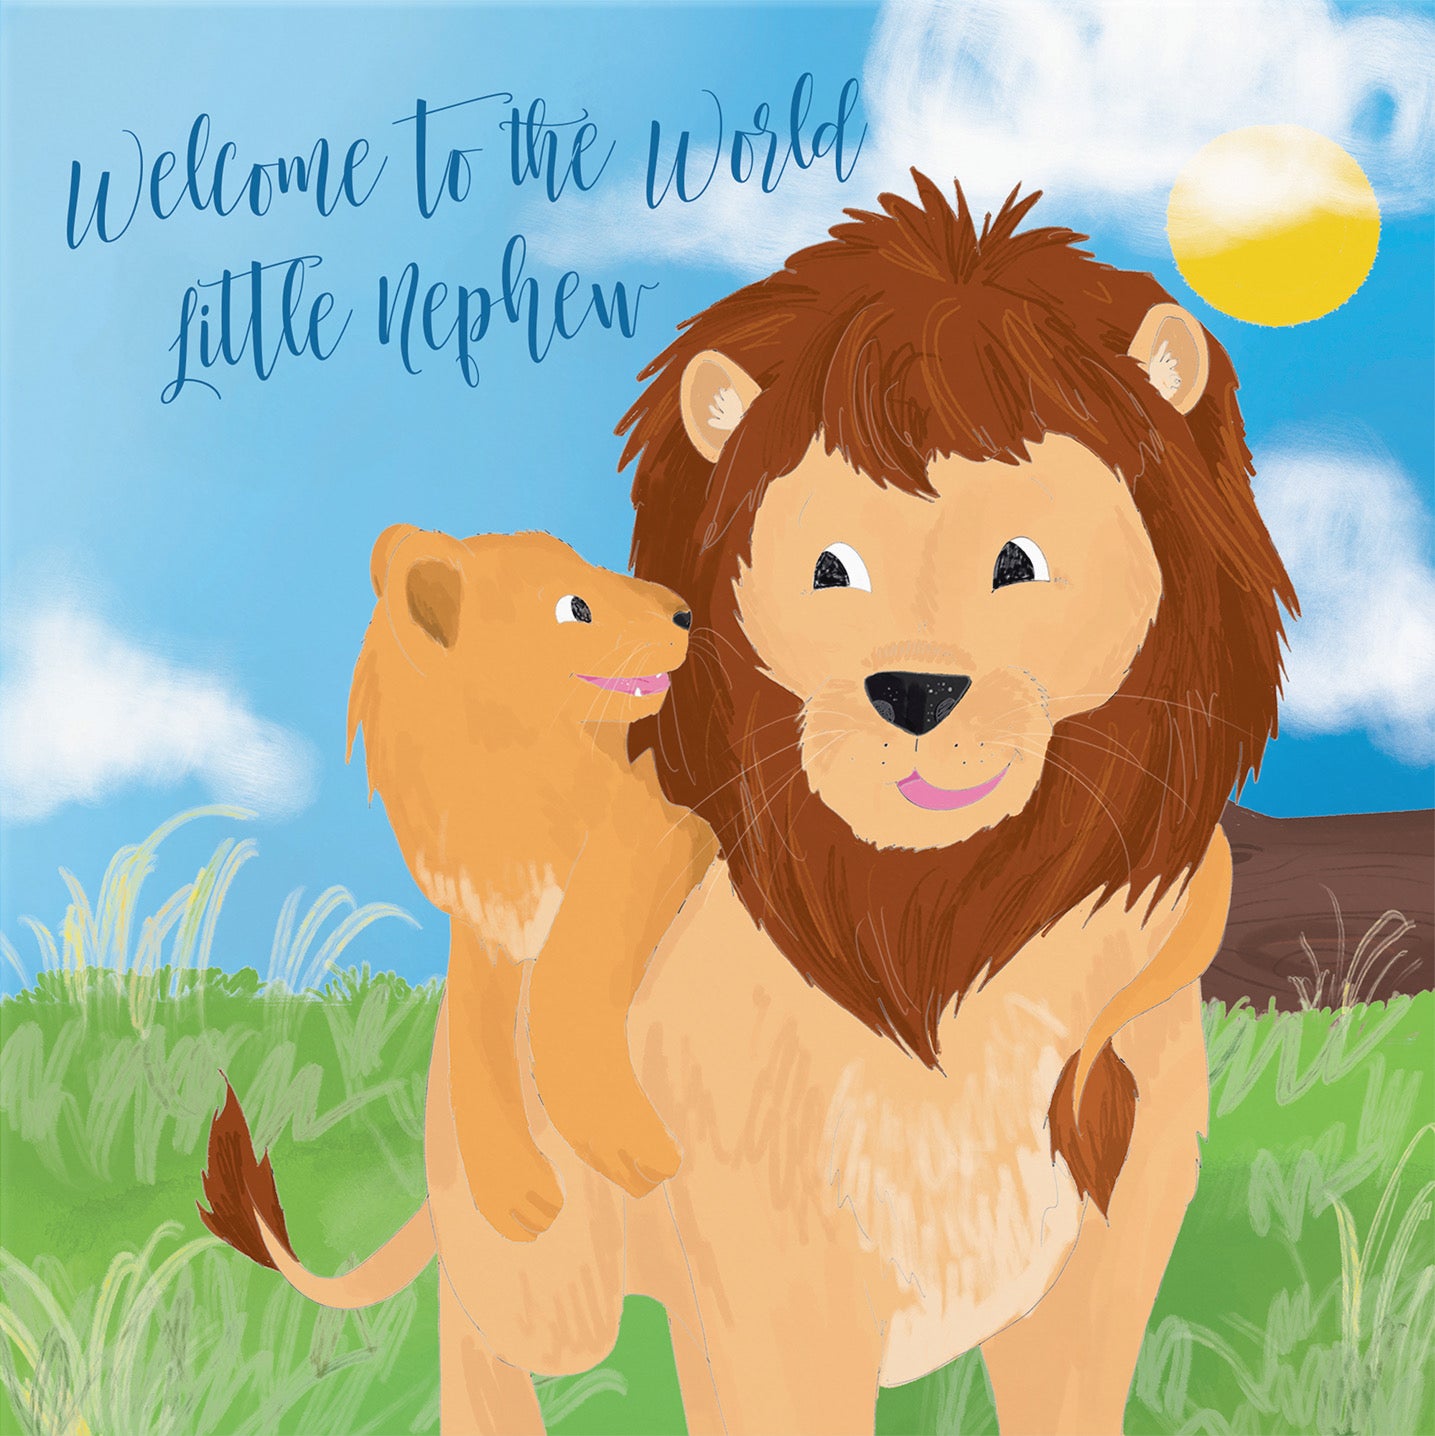 Welcome To The World Little Nephew Card Cute Lions Jungle - Default Title (B09VMQNZ8N)